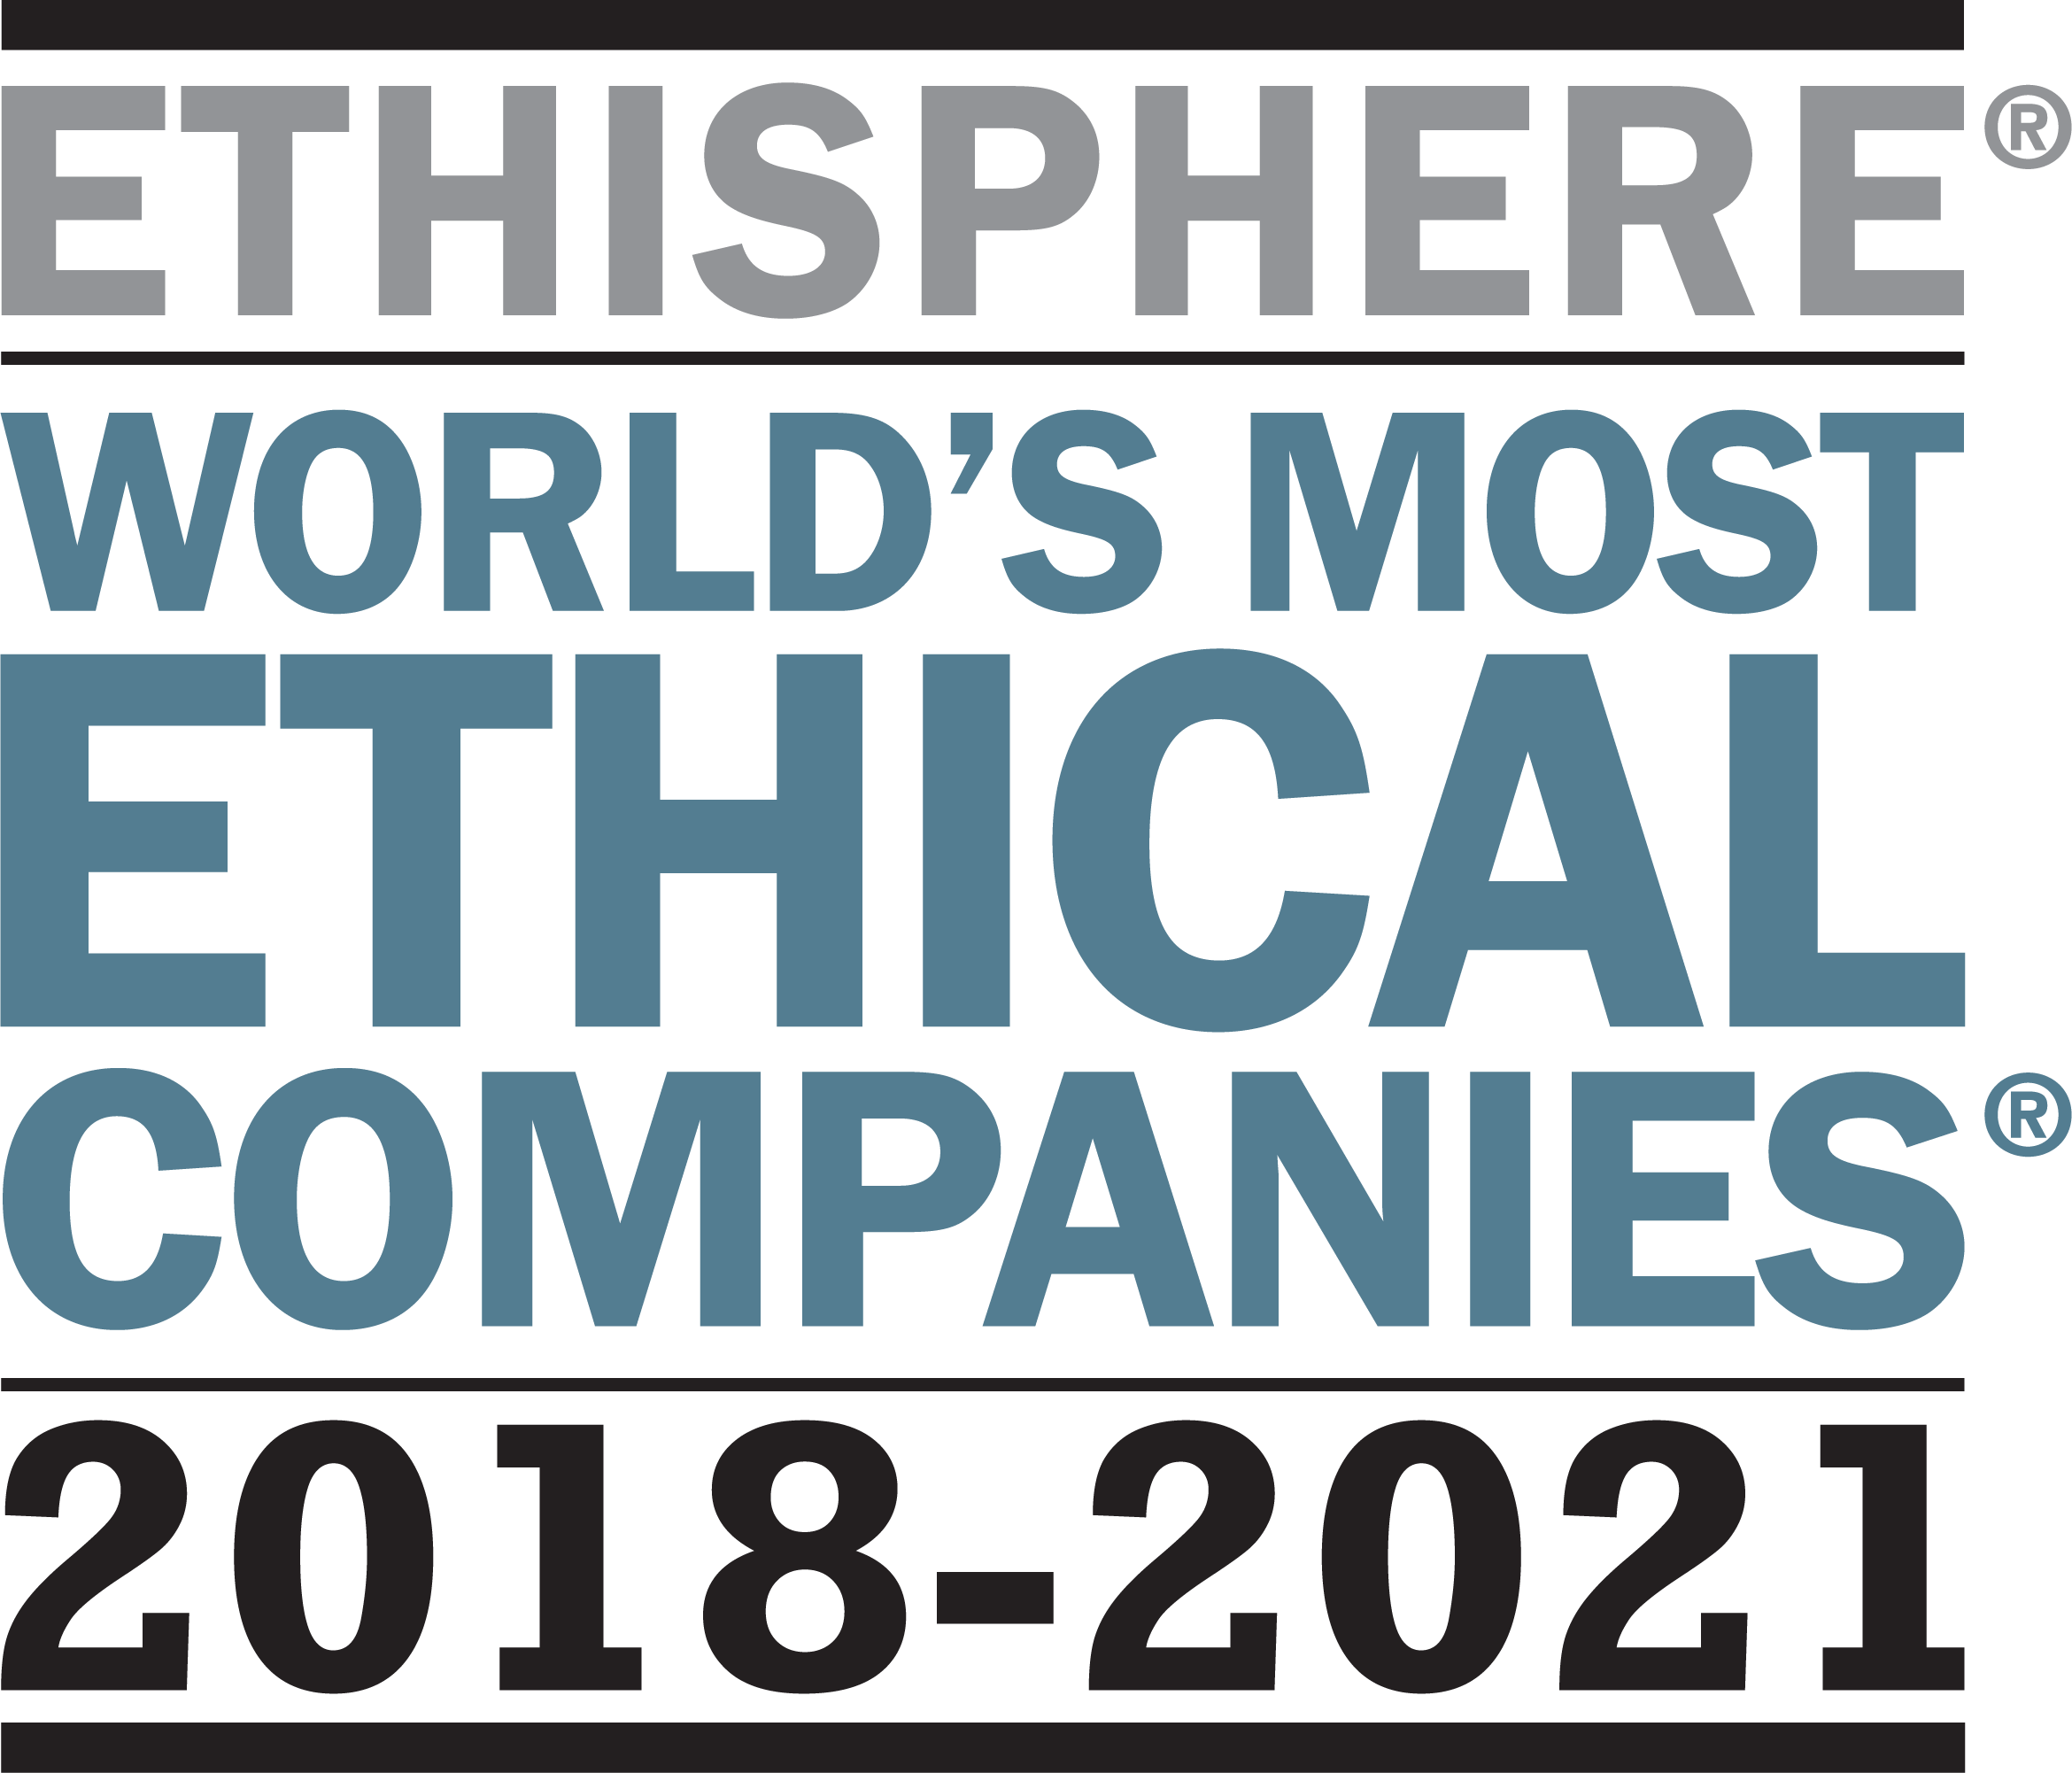 Lincoln Electric's logo for their 2021 World's Most Ethical Company distinction by Ethisphere